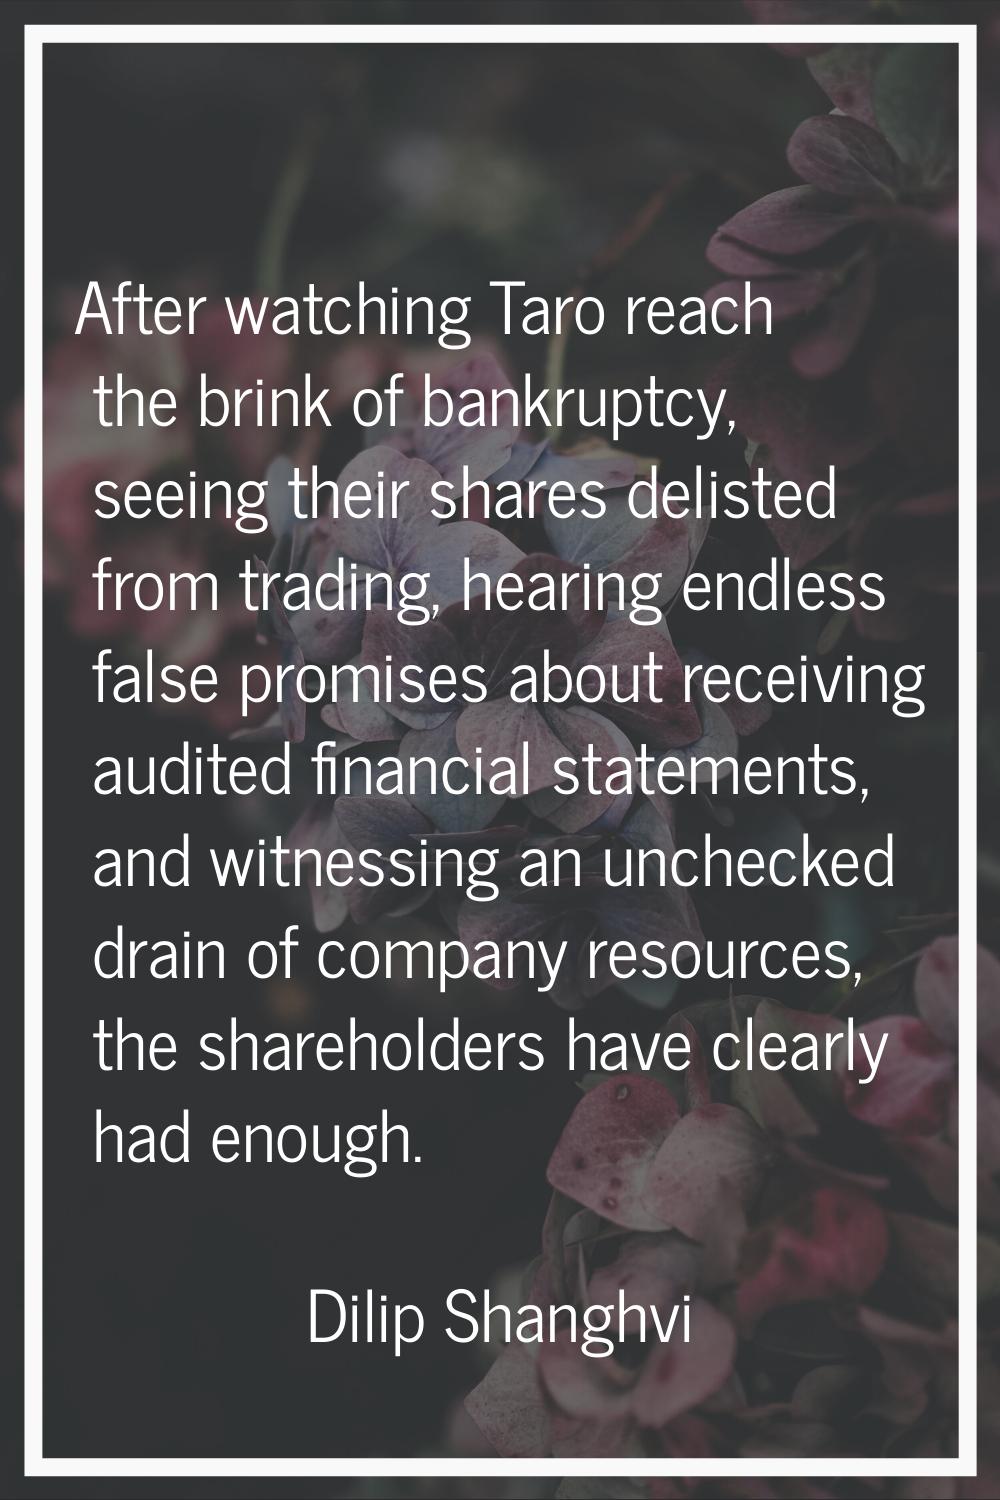 After watching Taro reach the brink of bankruptcy, seeing their shares delisted from trading, heari